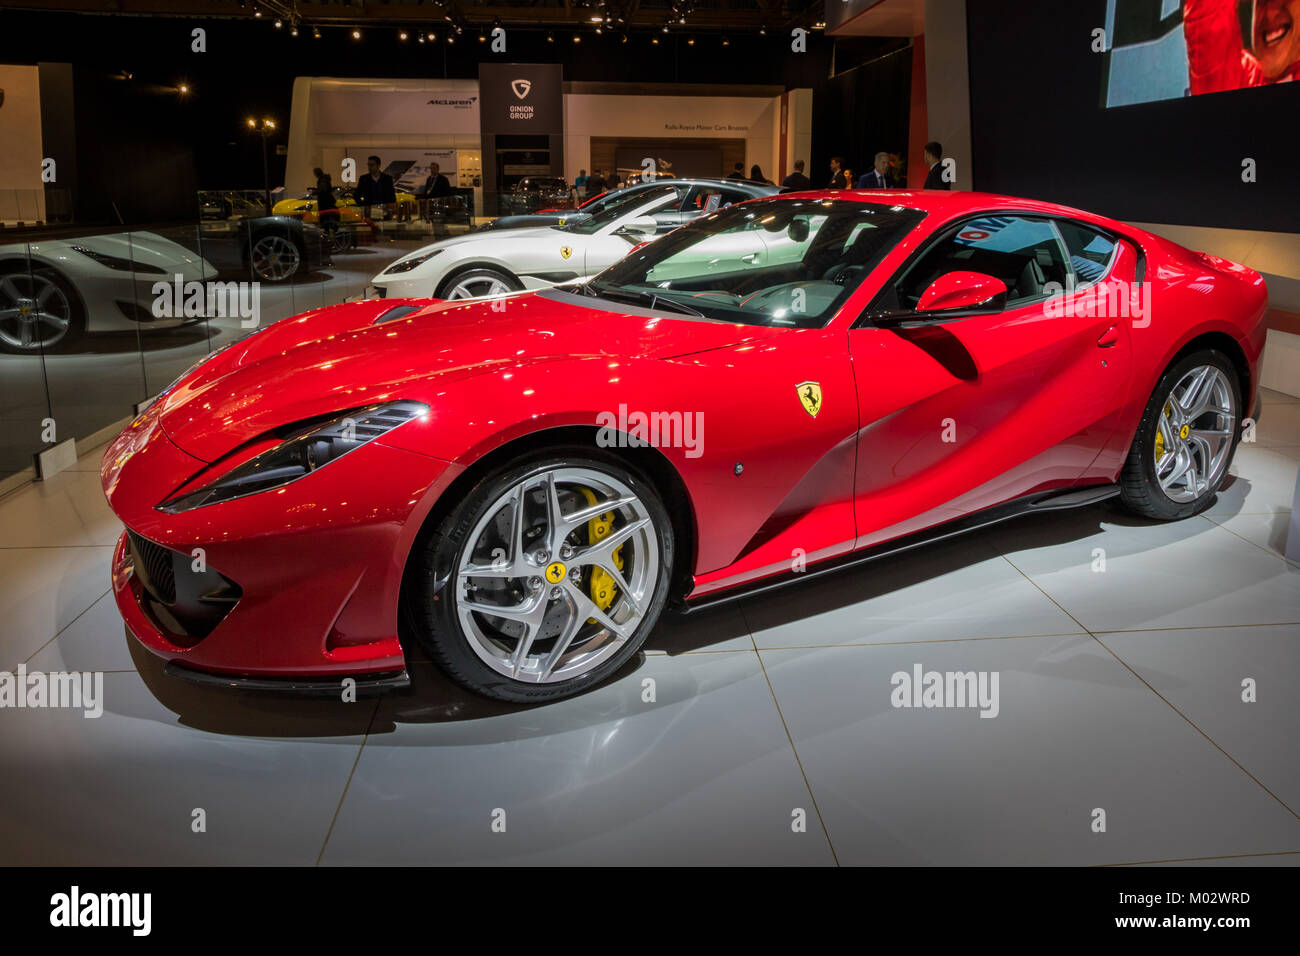 BRUSSELS - JAN 10, 2018: Ferrari 812 Superfast sports car showcased at the Brussels Motor Show. Stock Photo